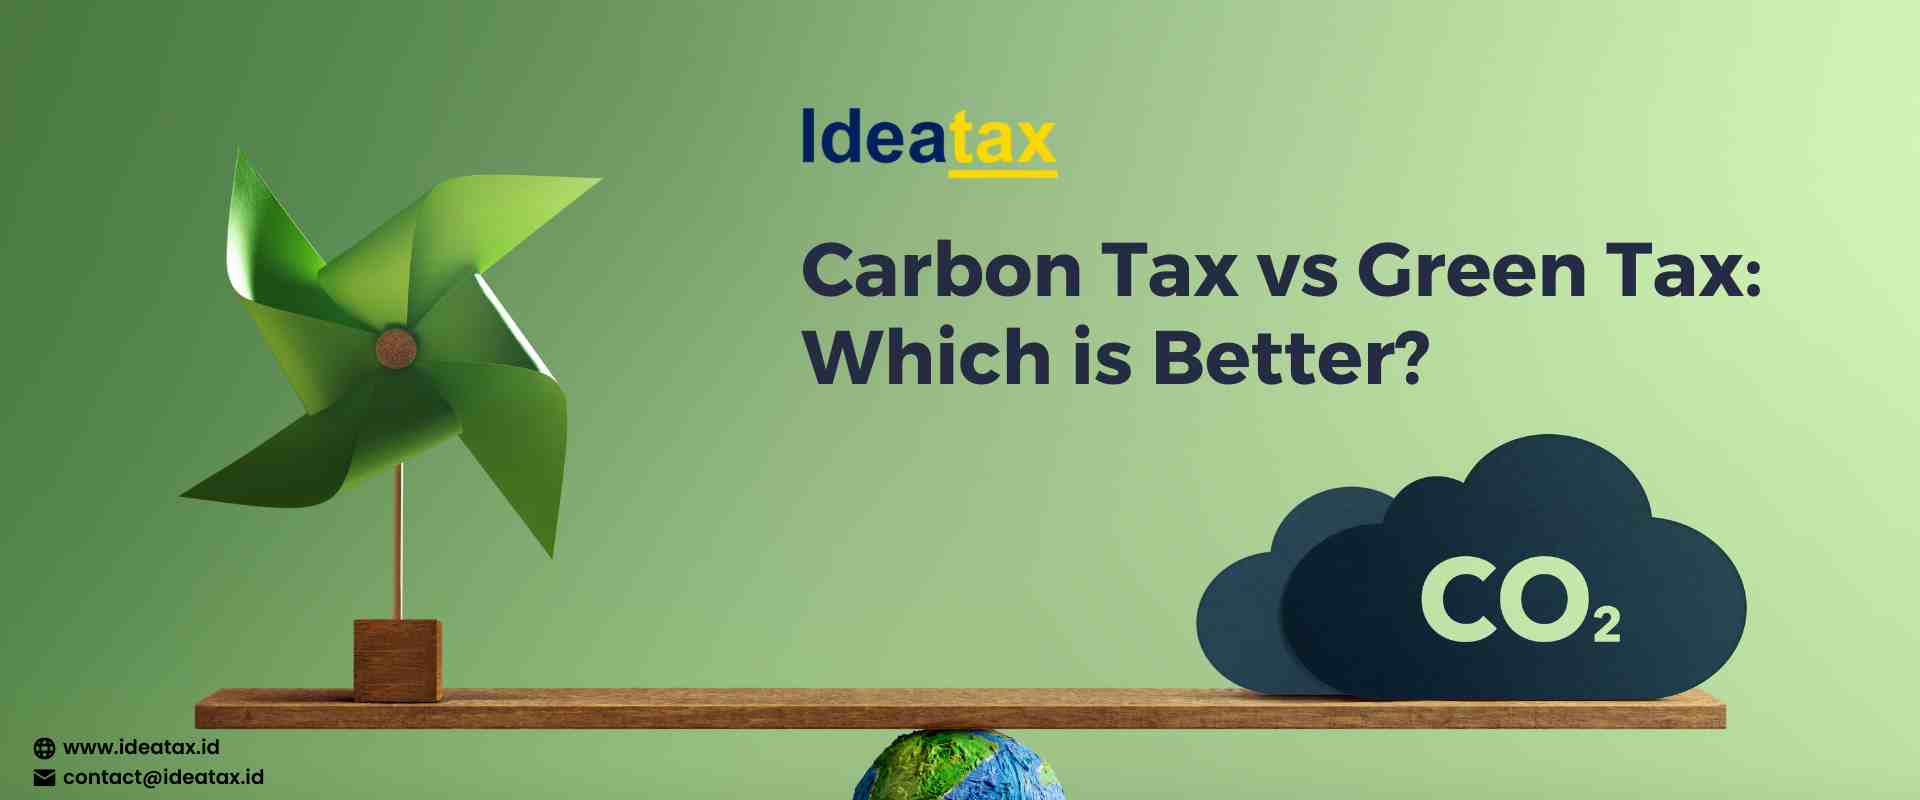 Carbon Tax vs Green Tax: Which is Better?